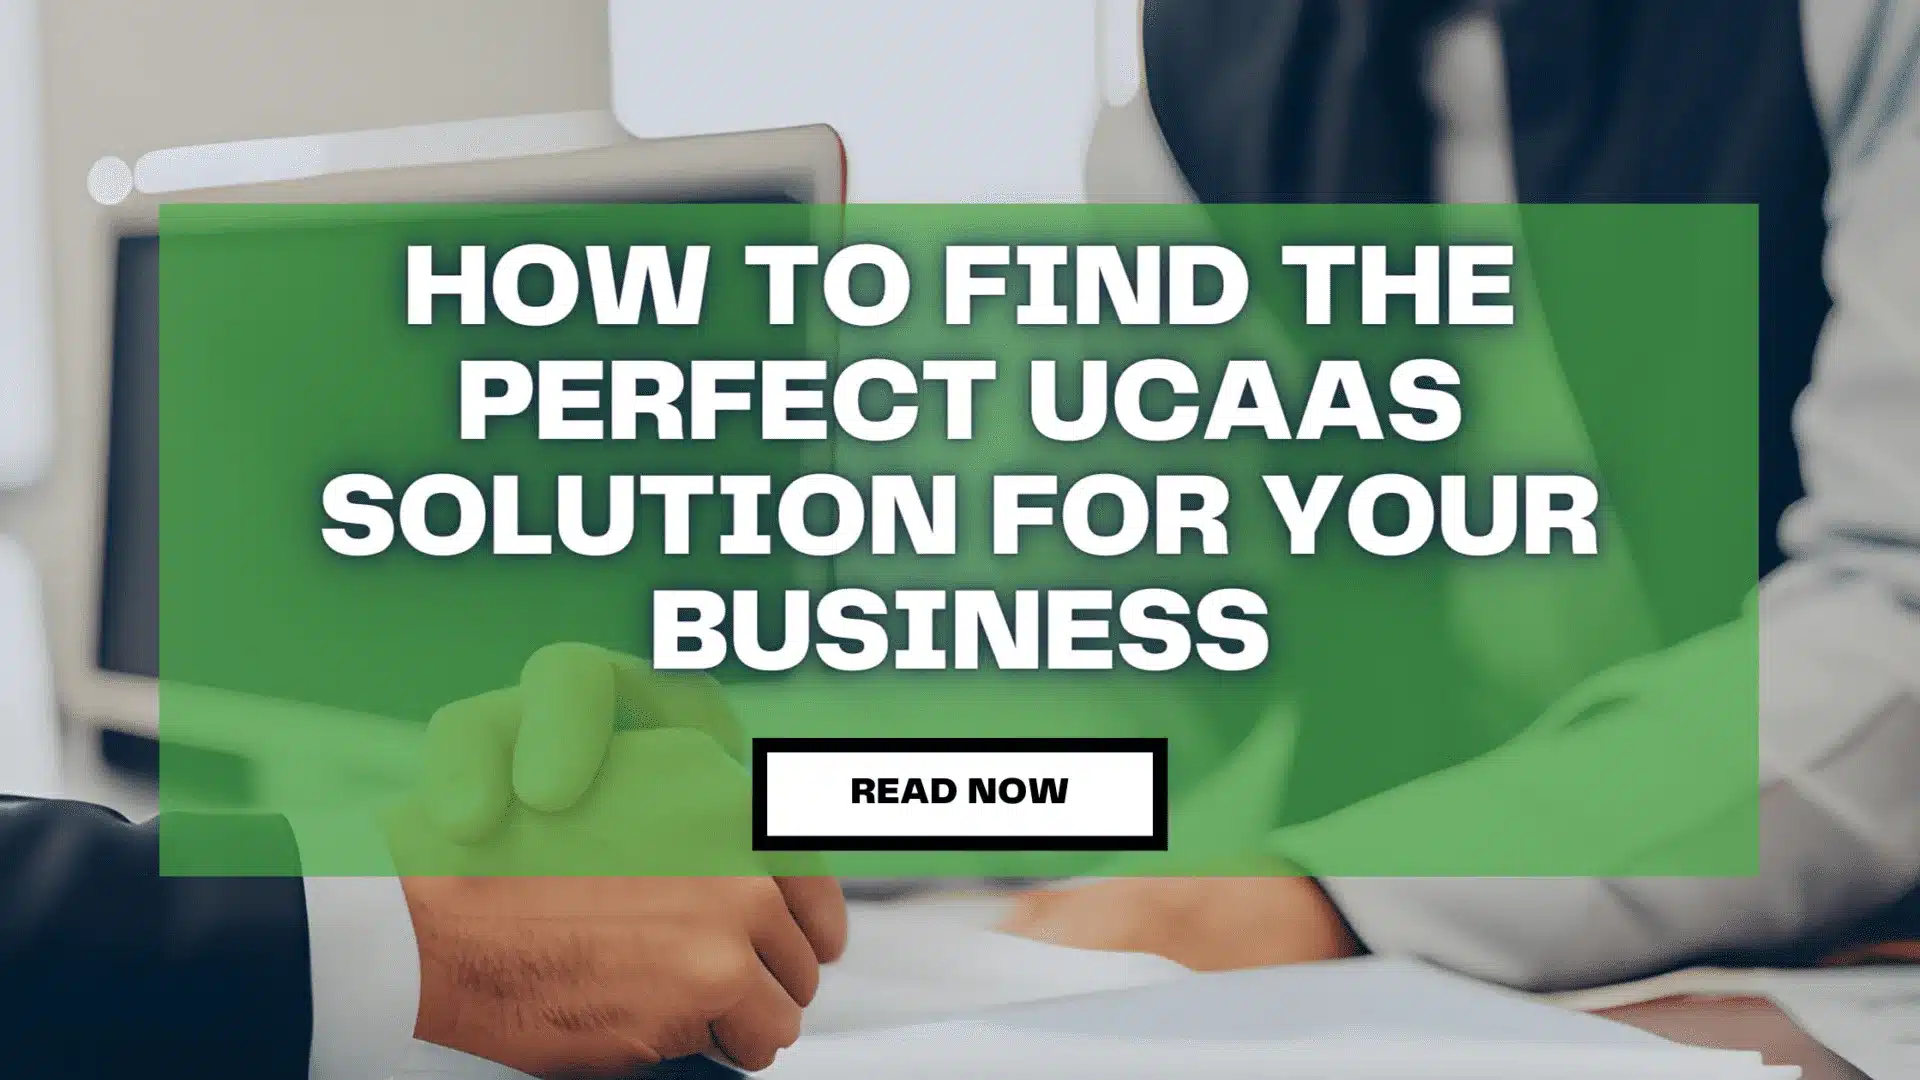 Optimize your business communications with UCaaS - a graphic depicting modern office environment with employees using communication tools like video conferencing, instant messaging, and file sharing. Learn when and why you need UCaaS for seamless collaboration and enhanced productivity. Find out more!